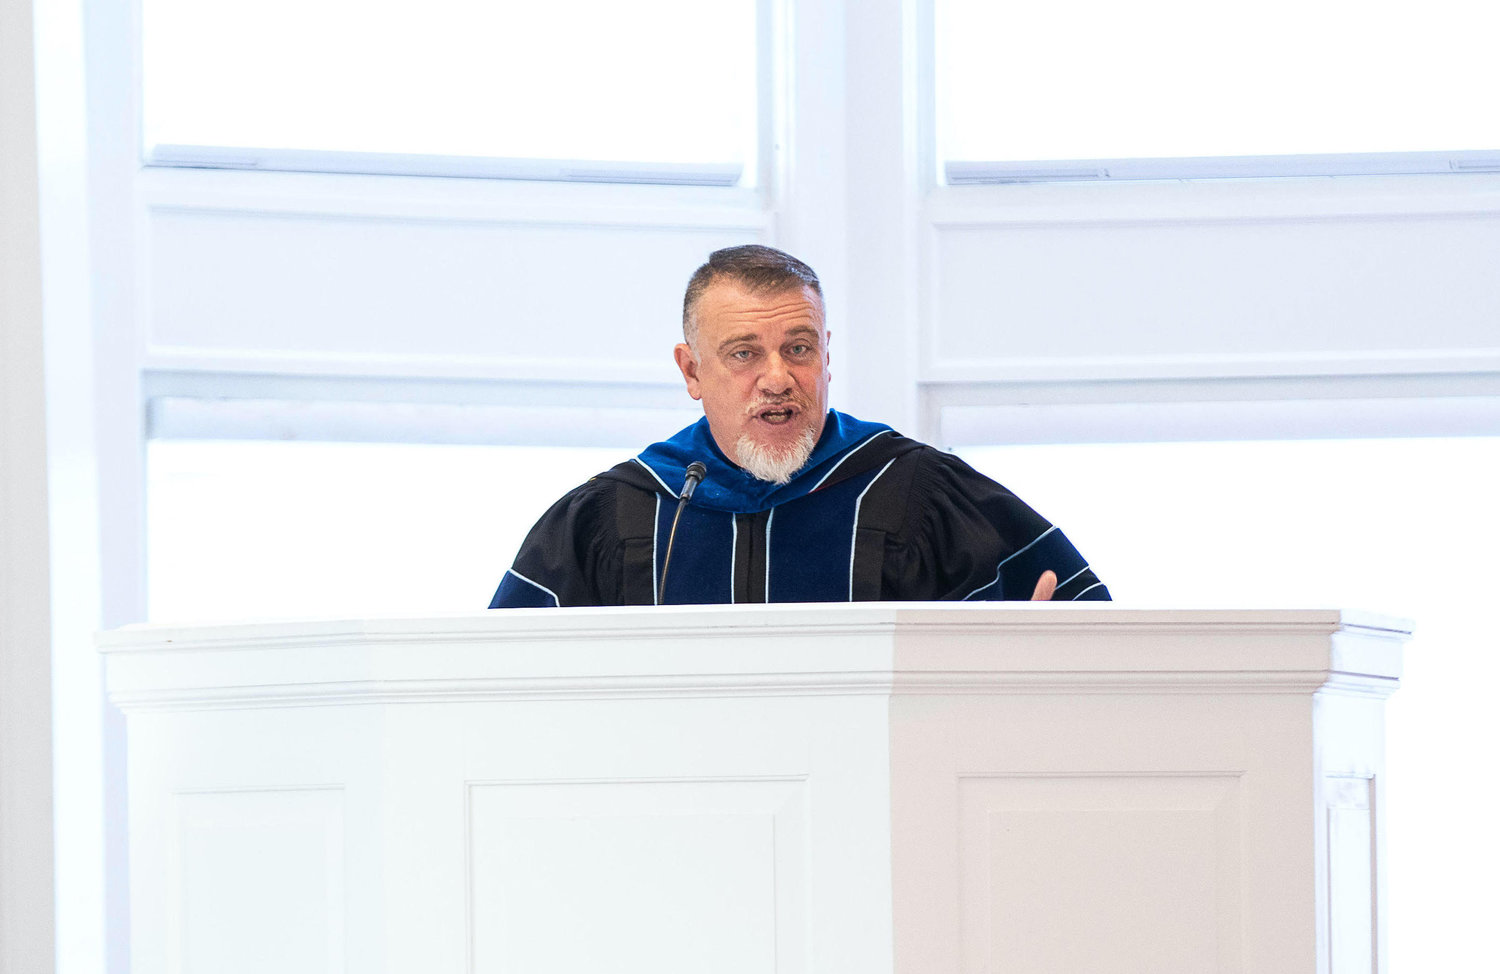 Timothy Paul Jones, professor of apologetics and family ministry at Southern Baptist Theological Seminary, delivers the annual Faculty Address. (Photo/Southern Baptist Theological Seminary)